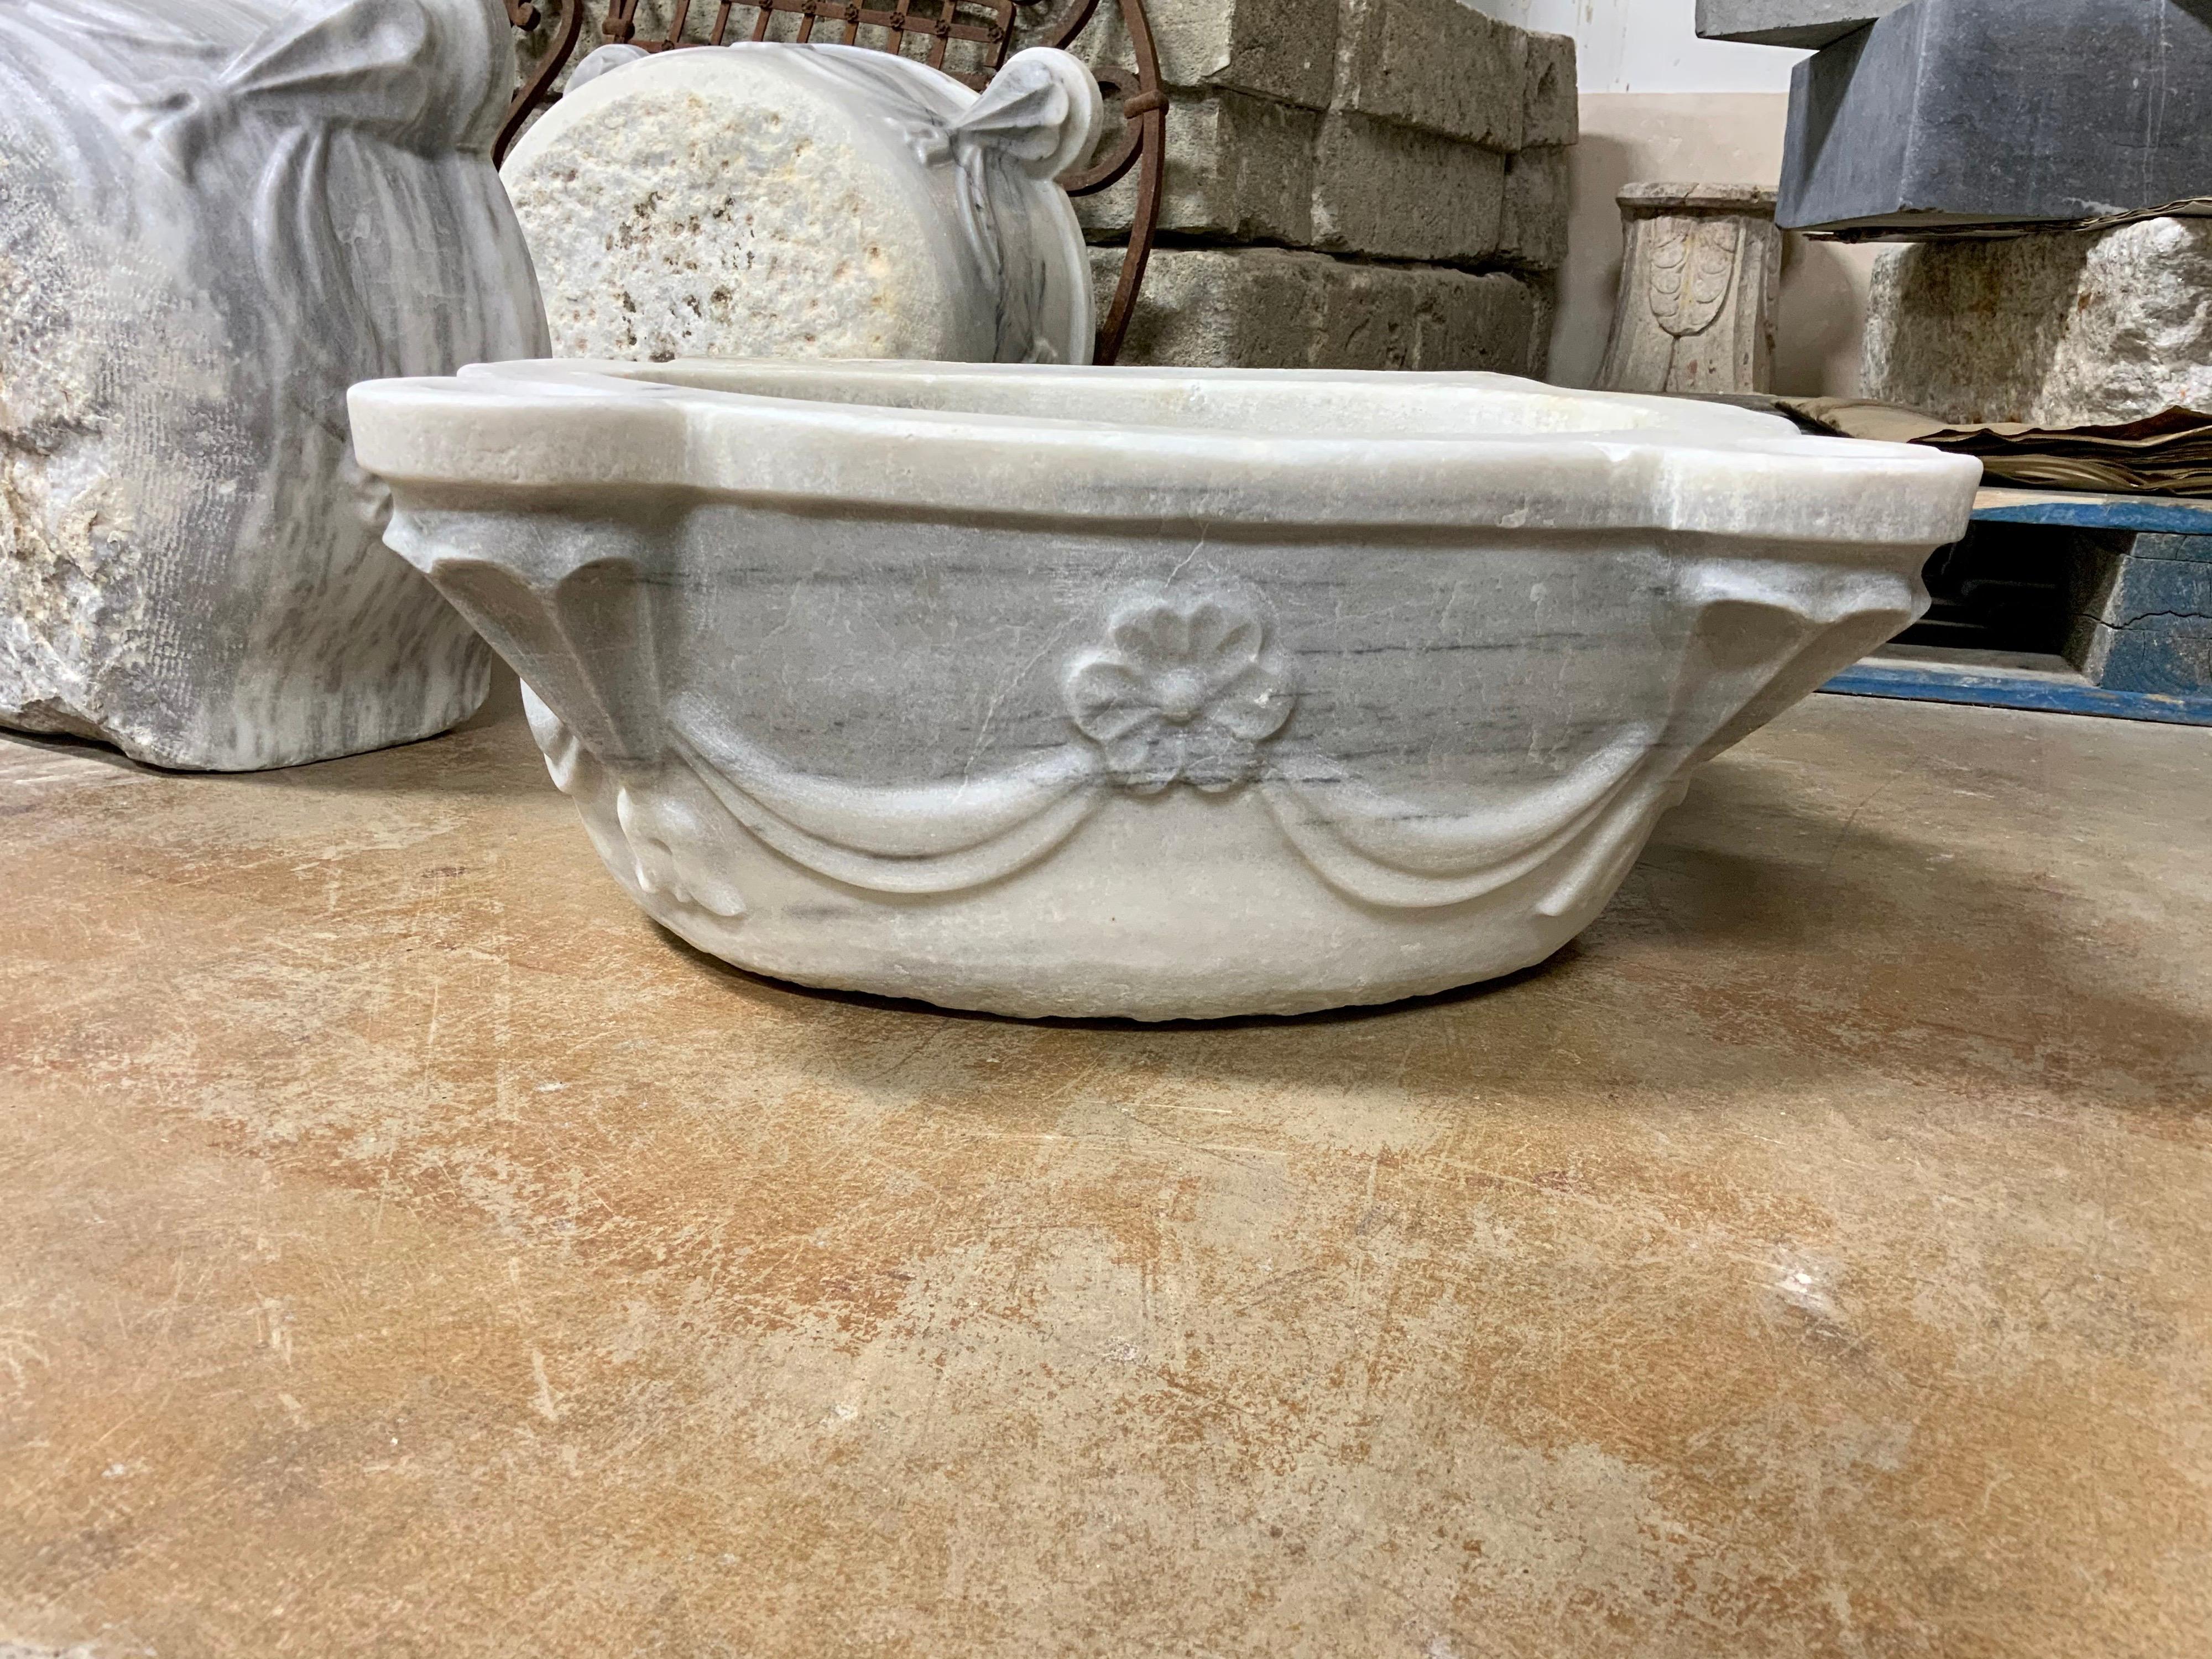 This marble sink origins from Greece, circa 1850.

Beautiful floral details.
